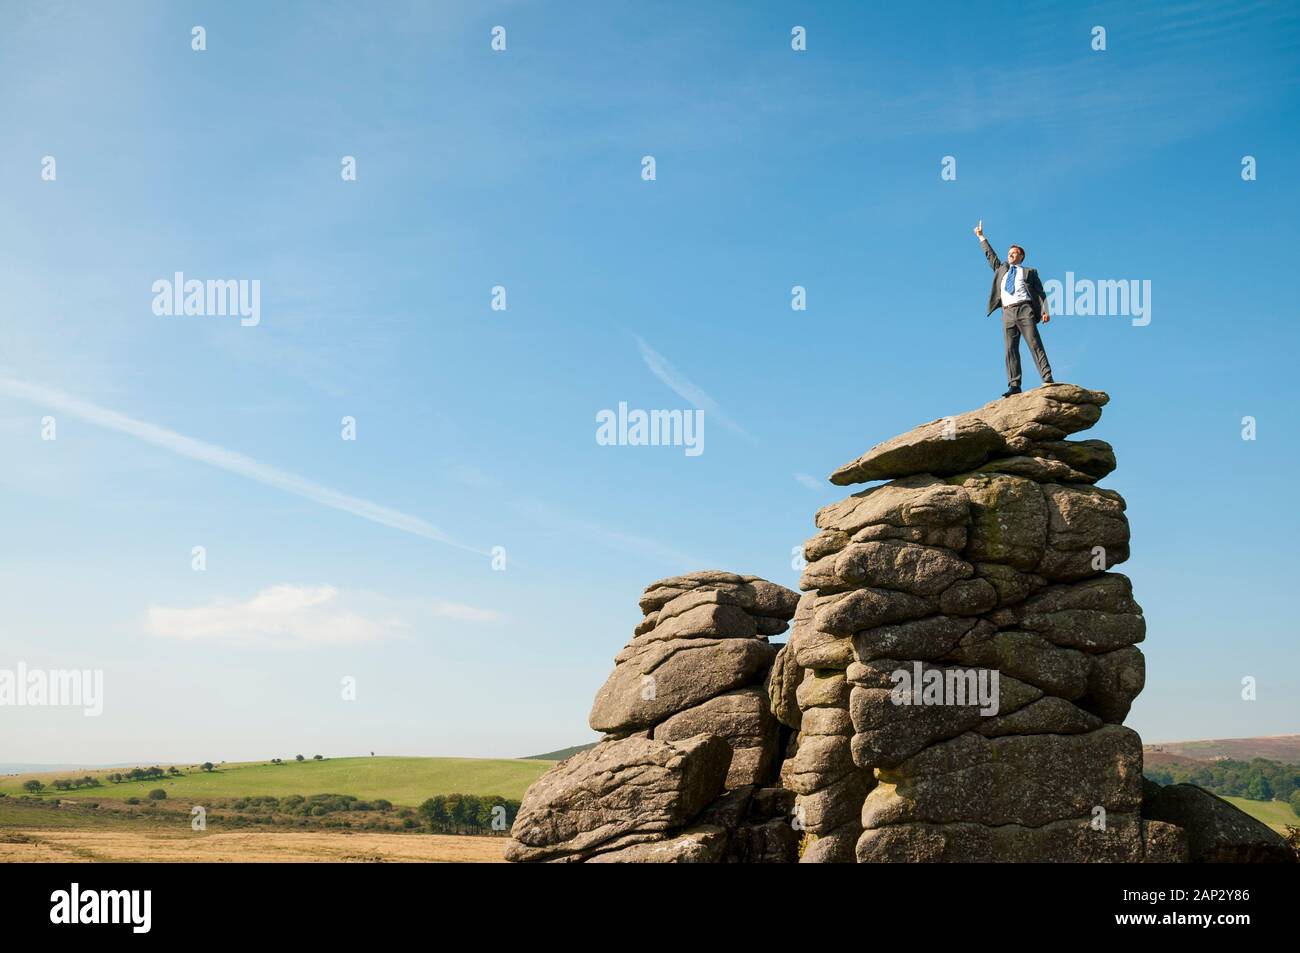 Distant businessman standing on the top of a rocky mountain with his finger pointed high in the air Stock Photo